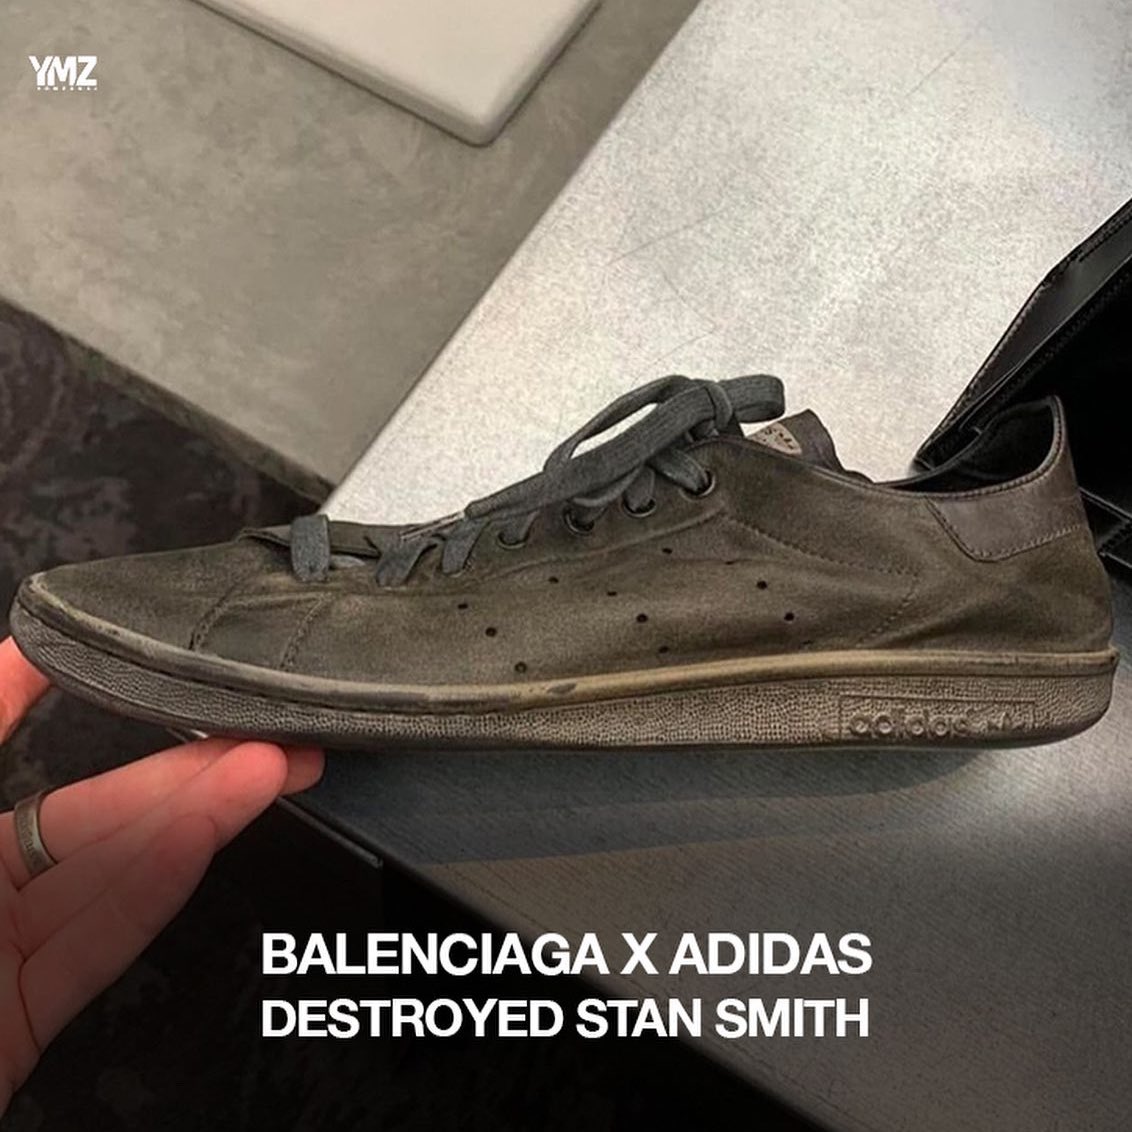 YOMZANSI Sneakers on X: "🥶 Would you cop these? Balenciaga x adidas  destroyed Smith. https://t.co/g9s8Cq9IQP" / X